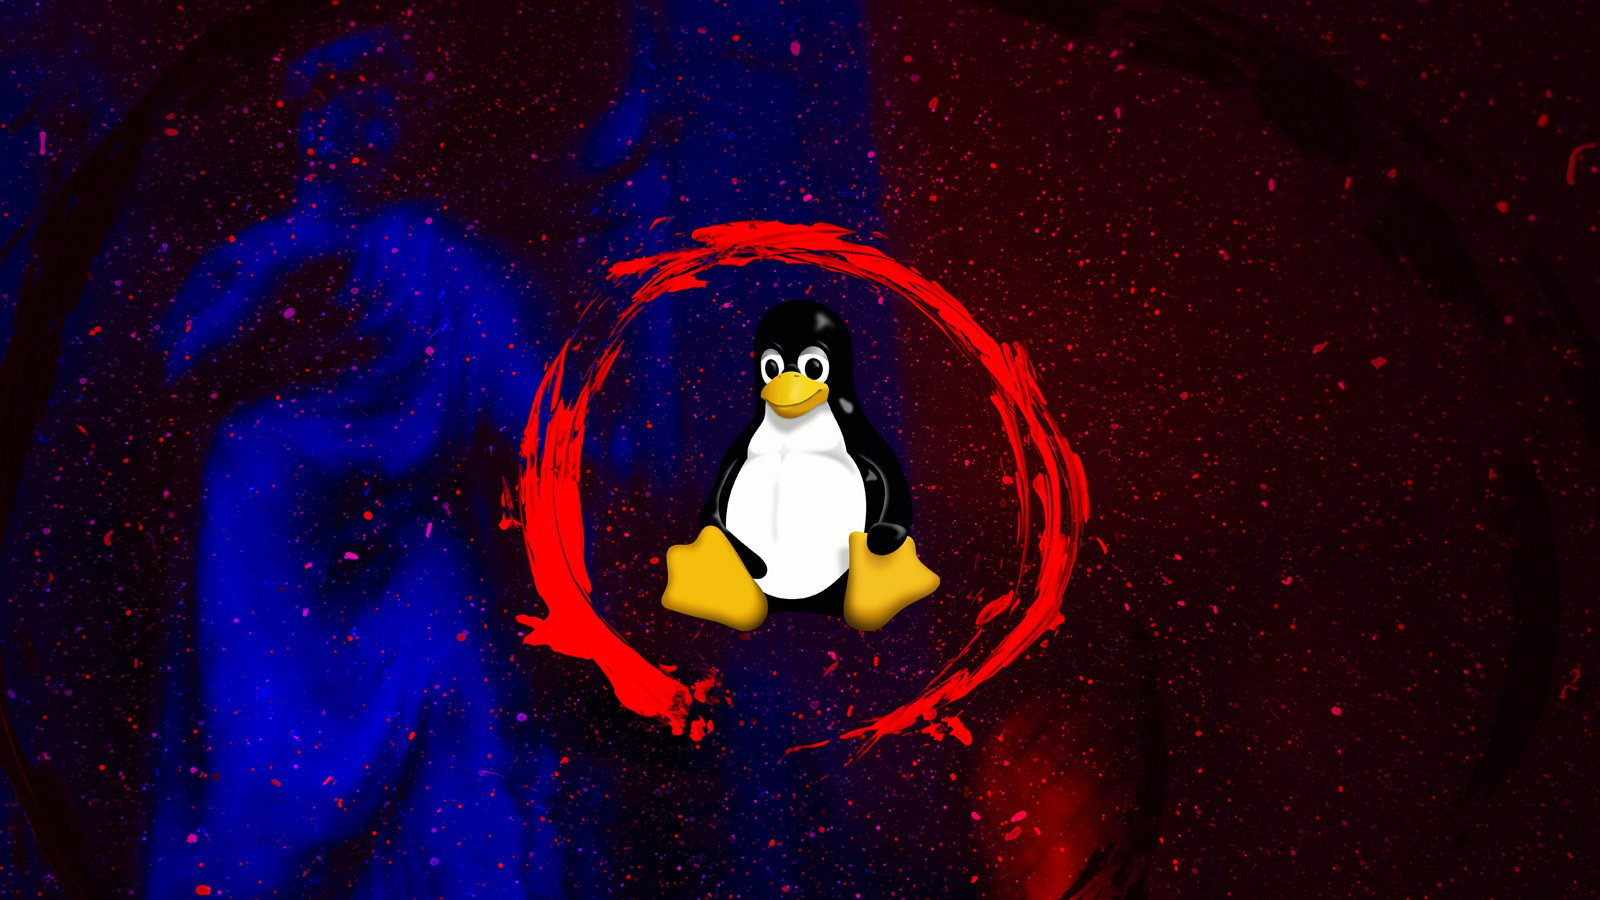 New Symbiote malware infects all running processes on Linux systems